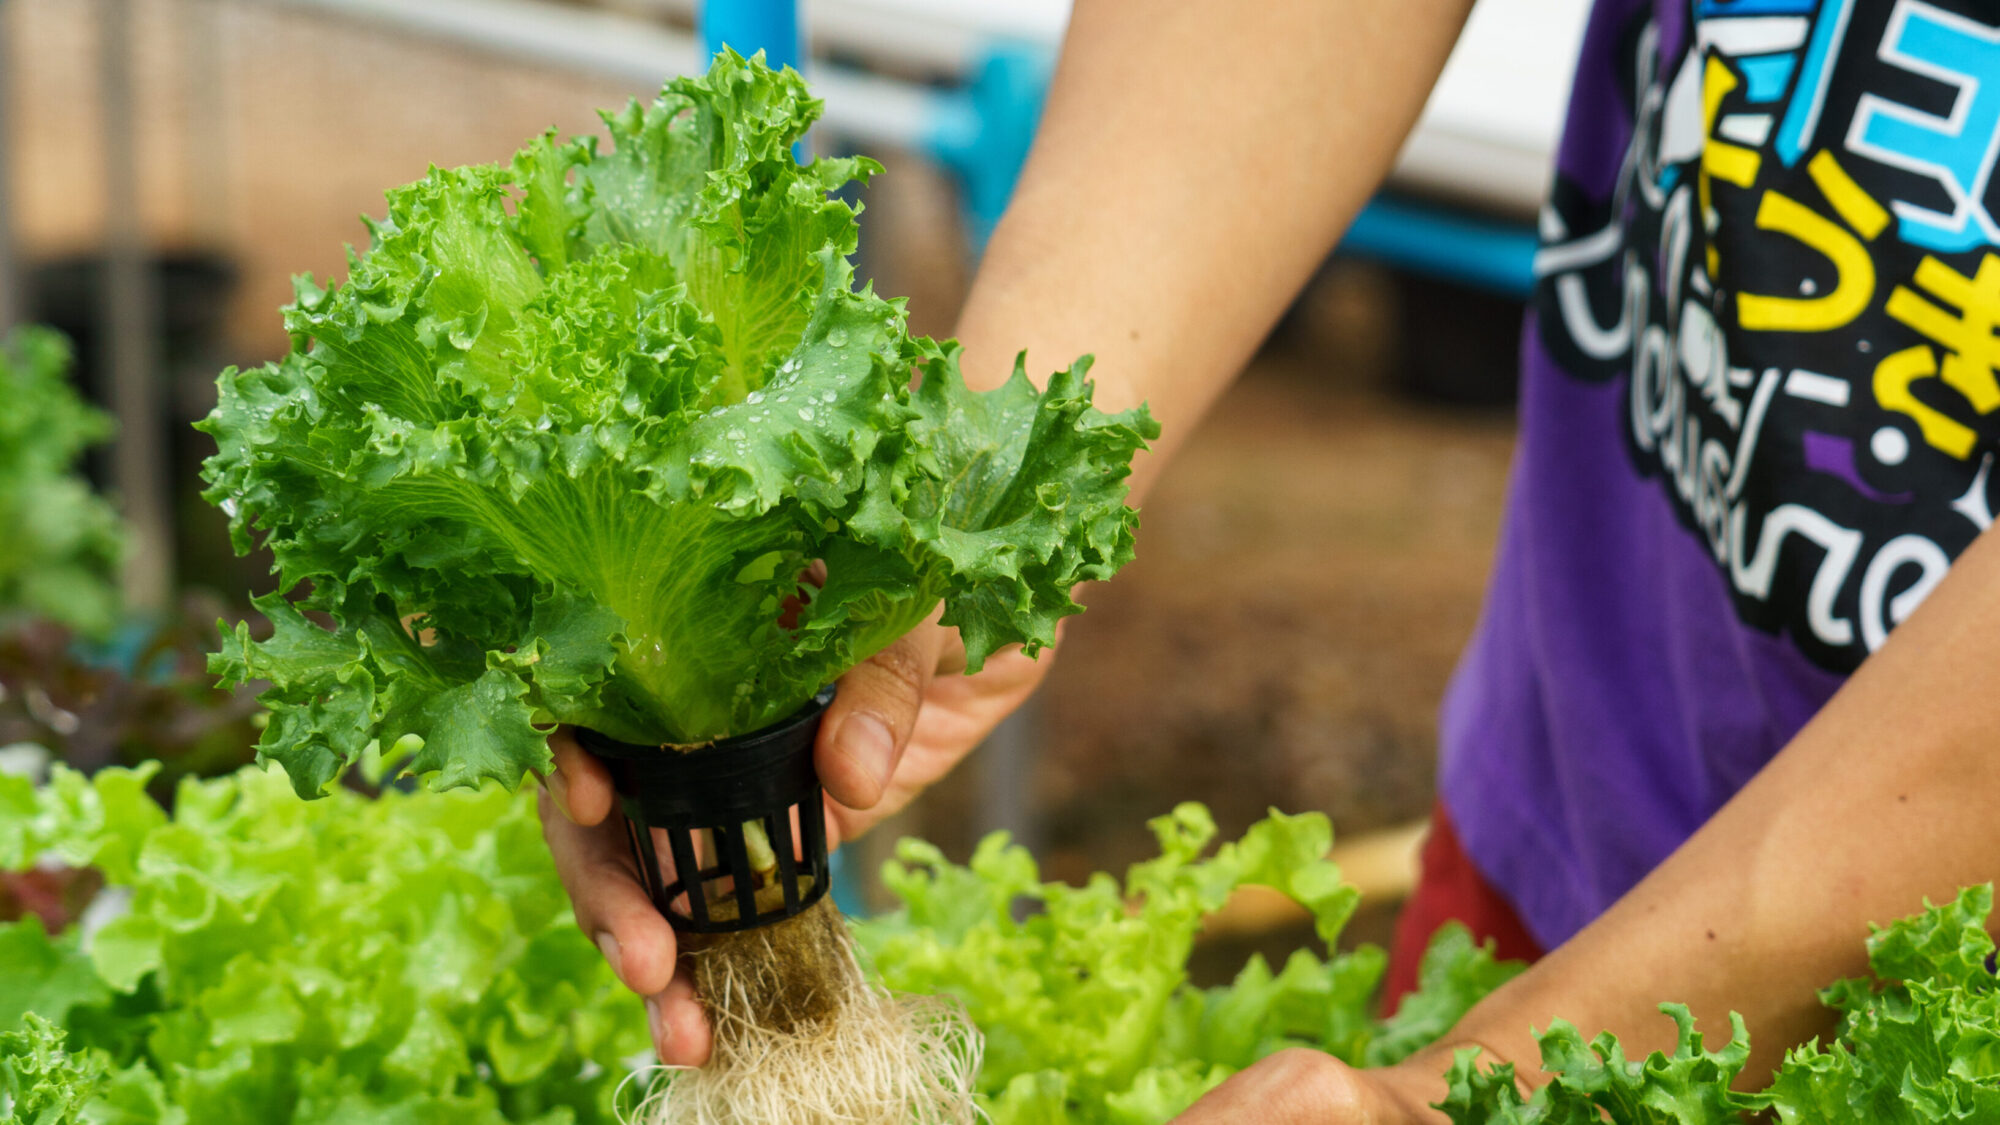 Hand holding a healthy hydroponic lettuce with roots, perfect for herb gardeners utilizing hydroponics.